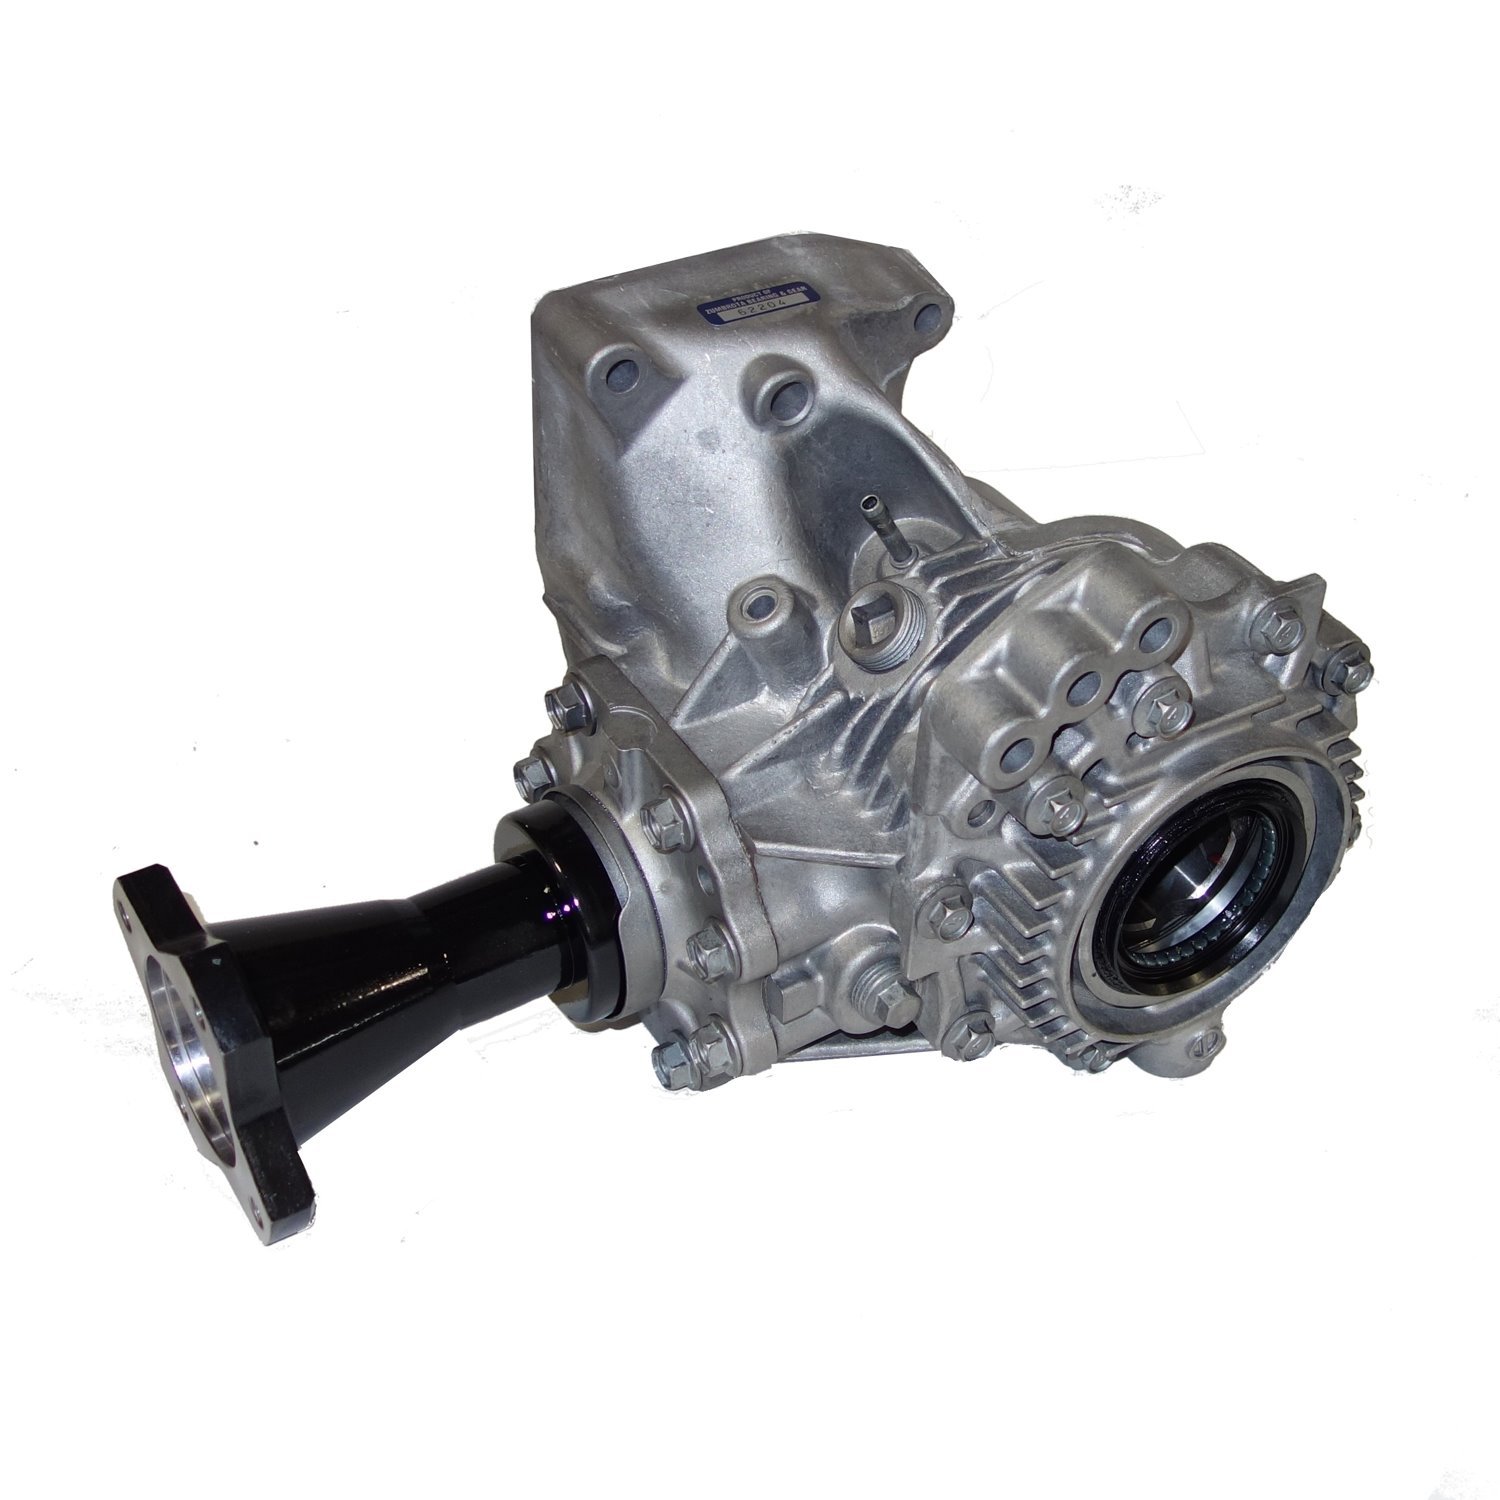 Remanufactured Transfer Case for Nissan 05-07 Murano